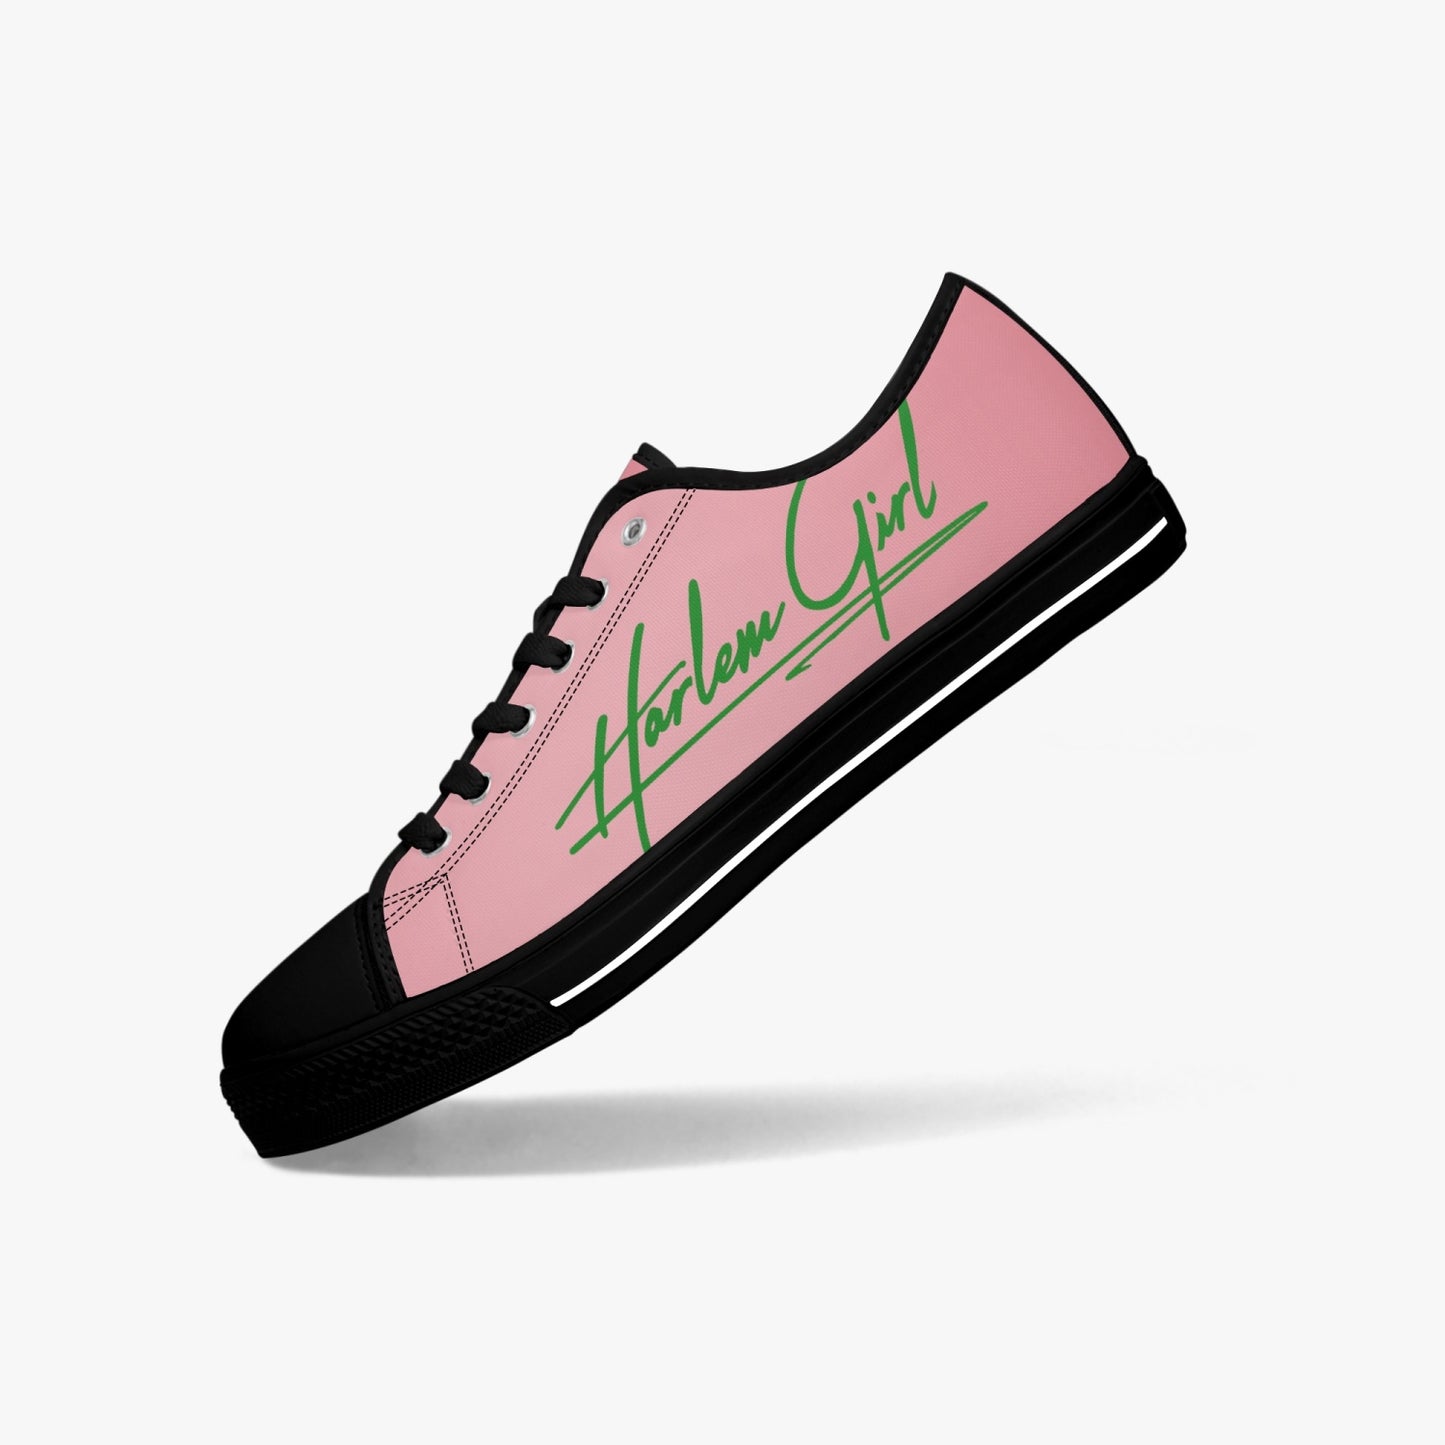 HB Harlem Girl "Lenox Ave" Classic Low Tops - Pink n Green - Women (Black or White Sole)